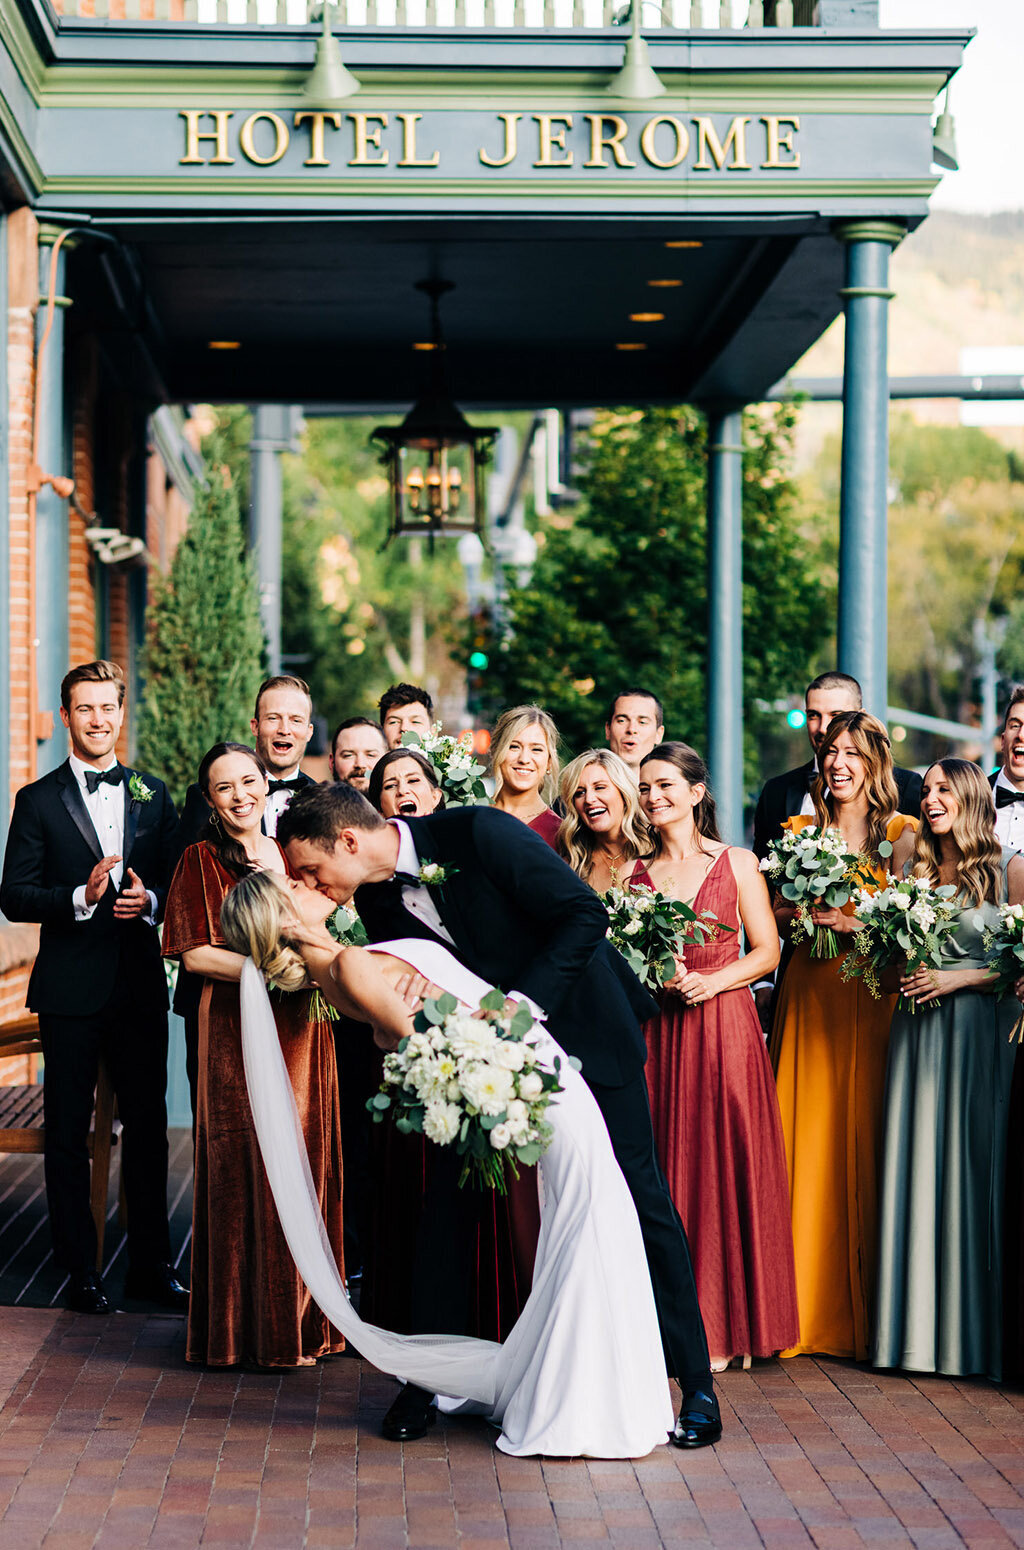 Wedding at Hotel Jerome in Aspen by GoBella Events10